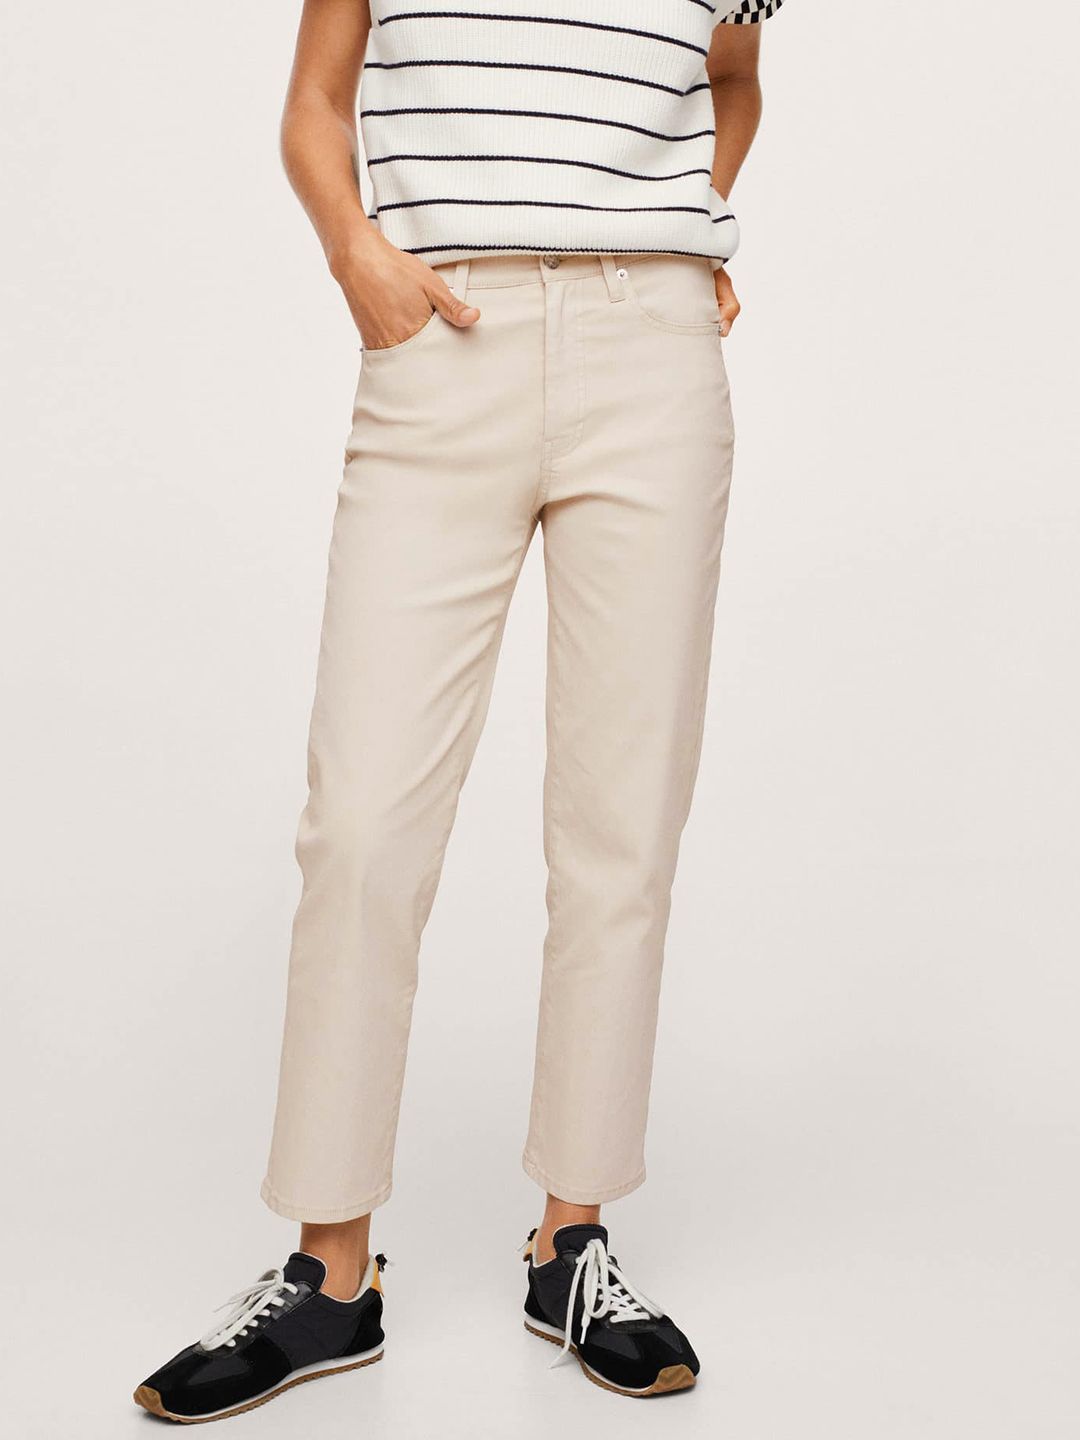 MANGO Women Off White Straight Fit Cropped Jeans Price in India